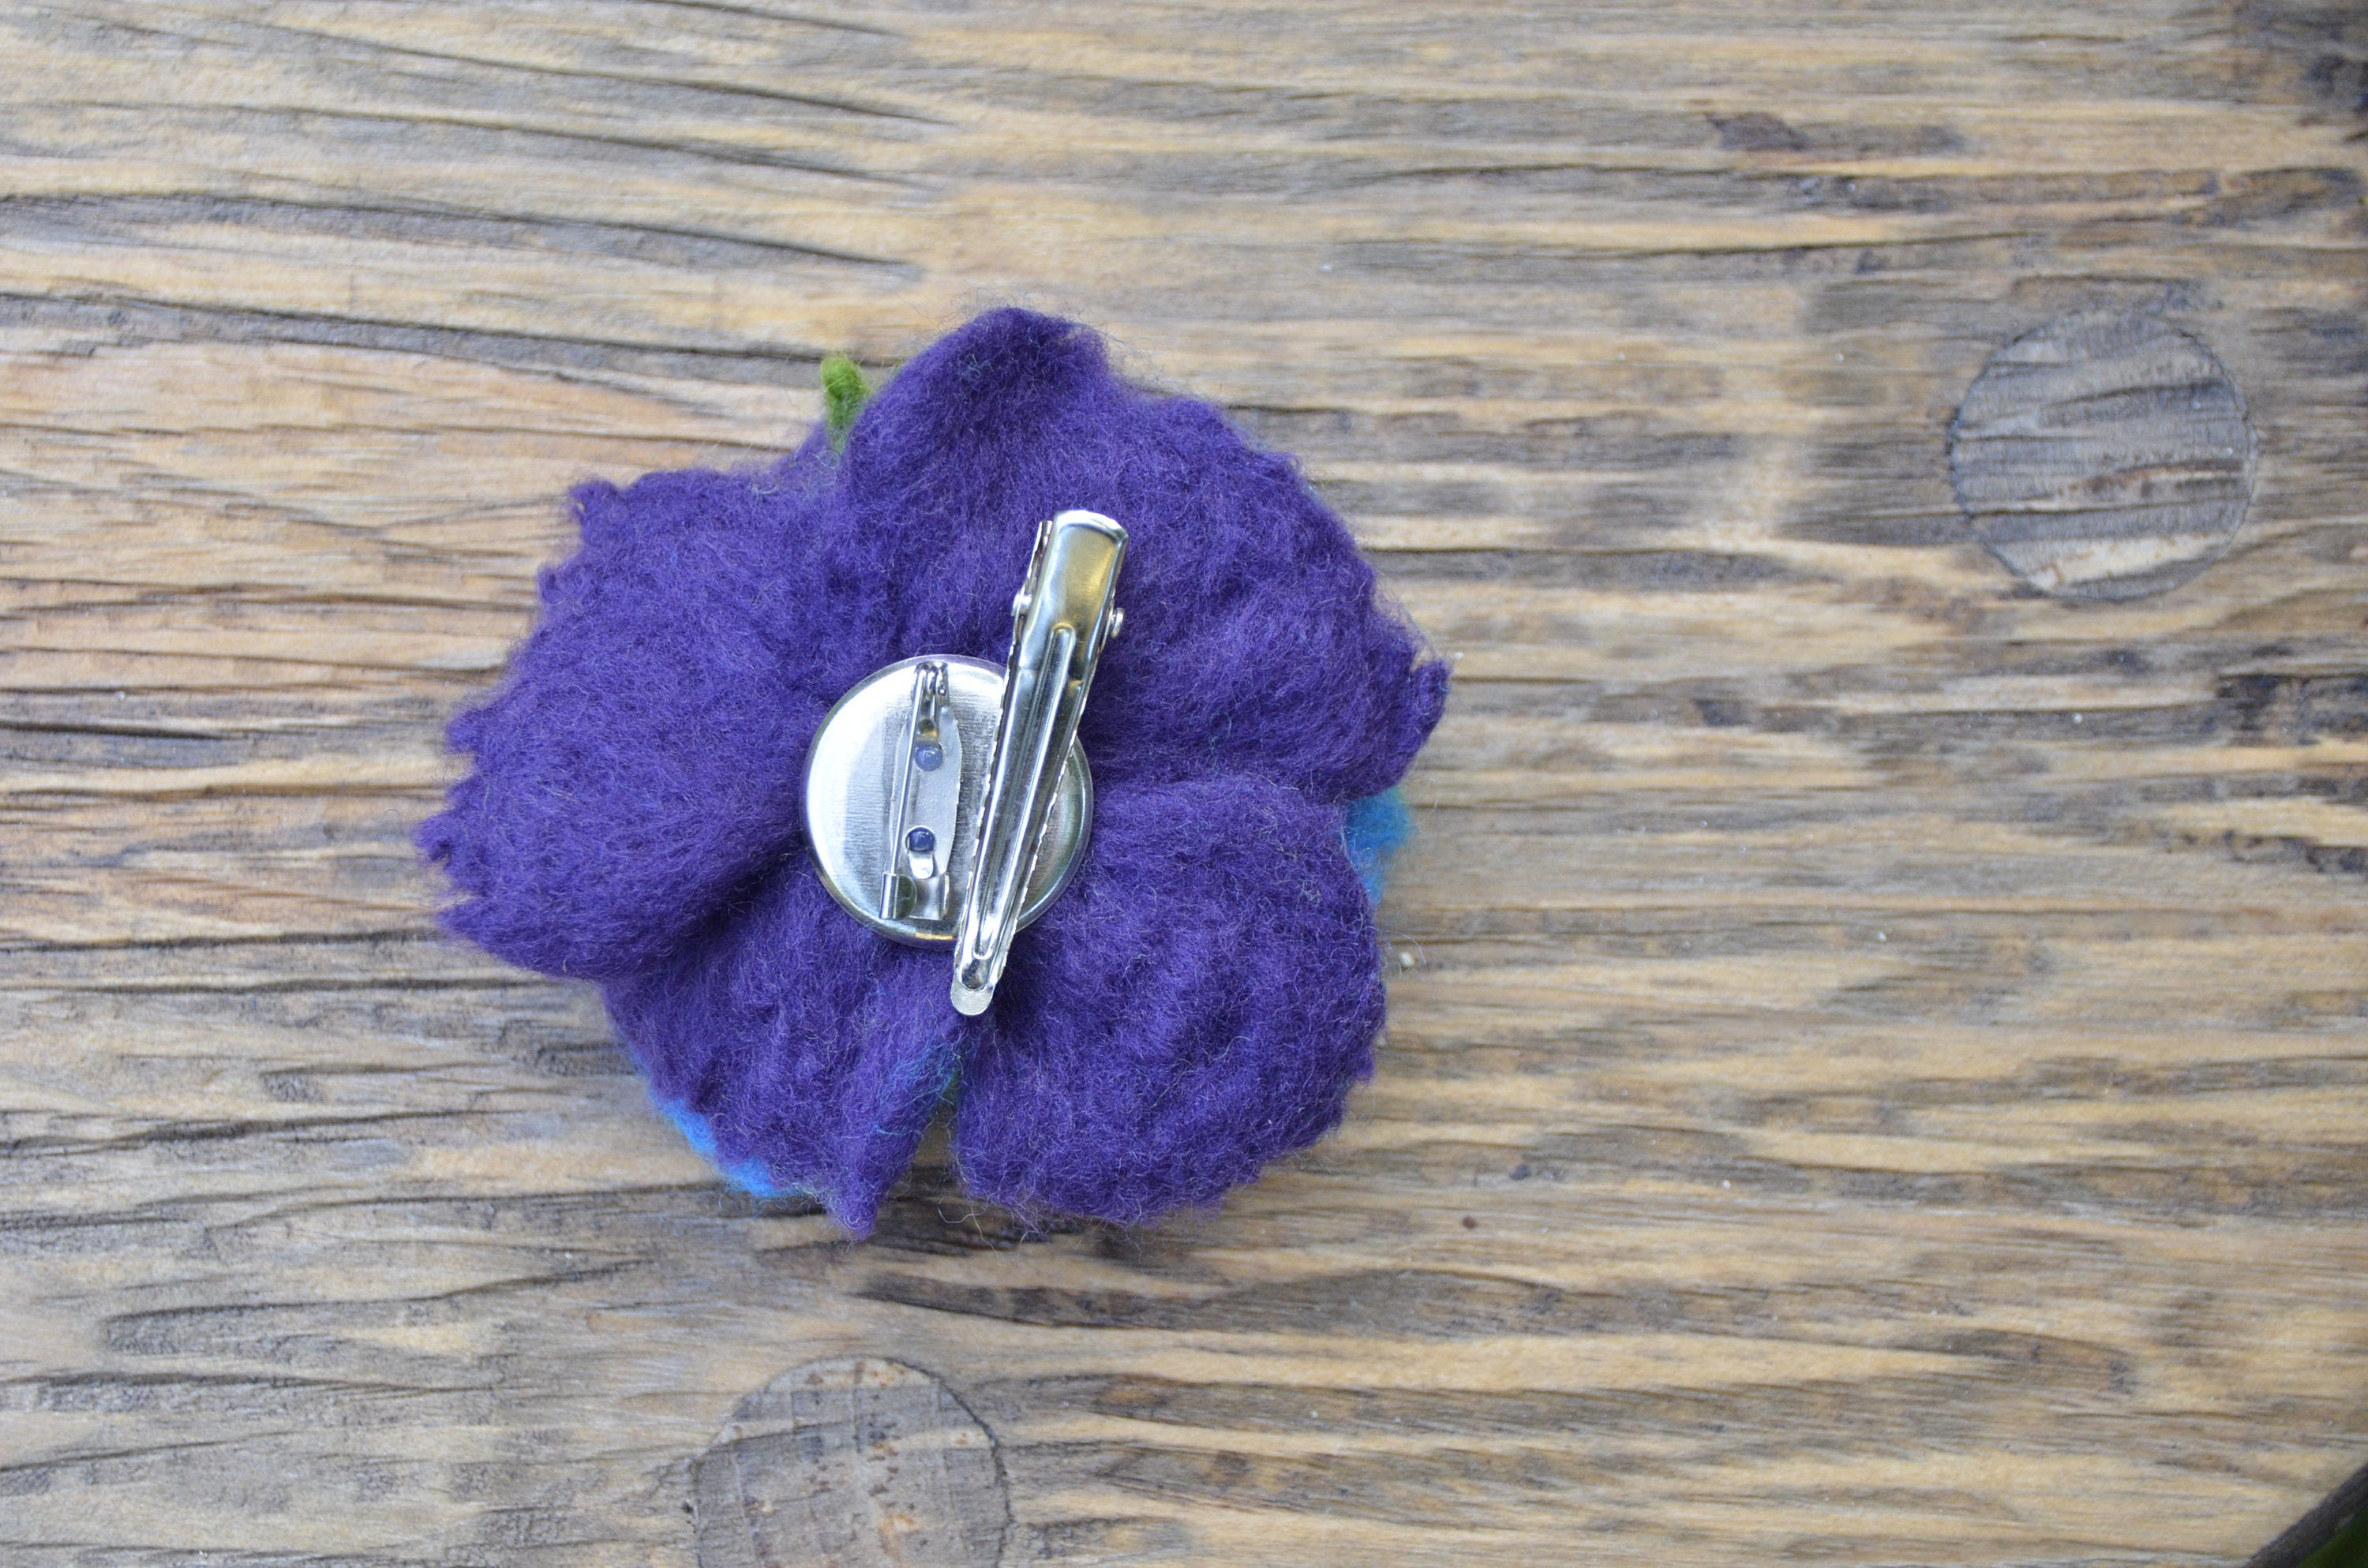 Blue and Green Felt Flower Brooch With Black Stamens | Etsy